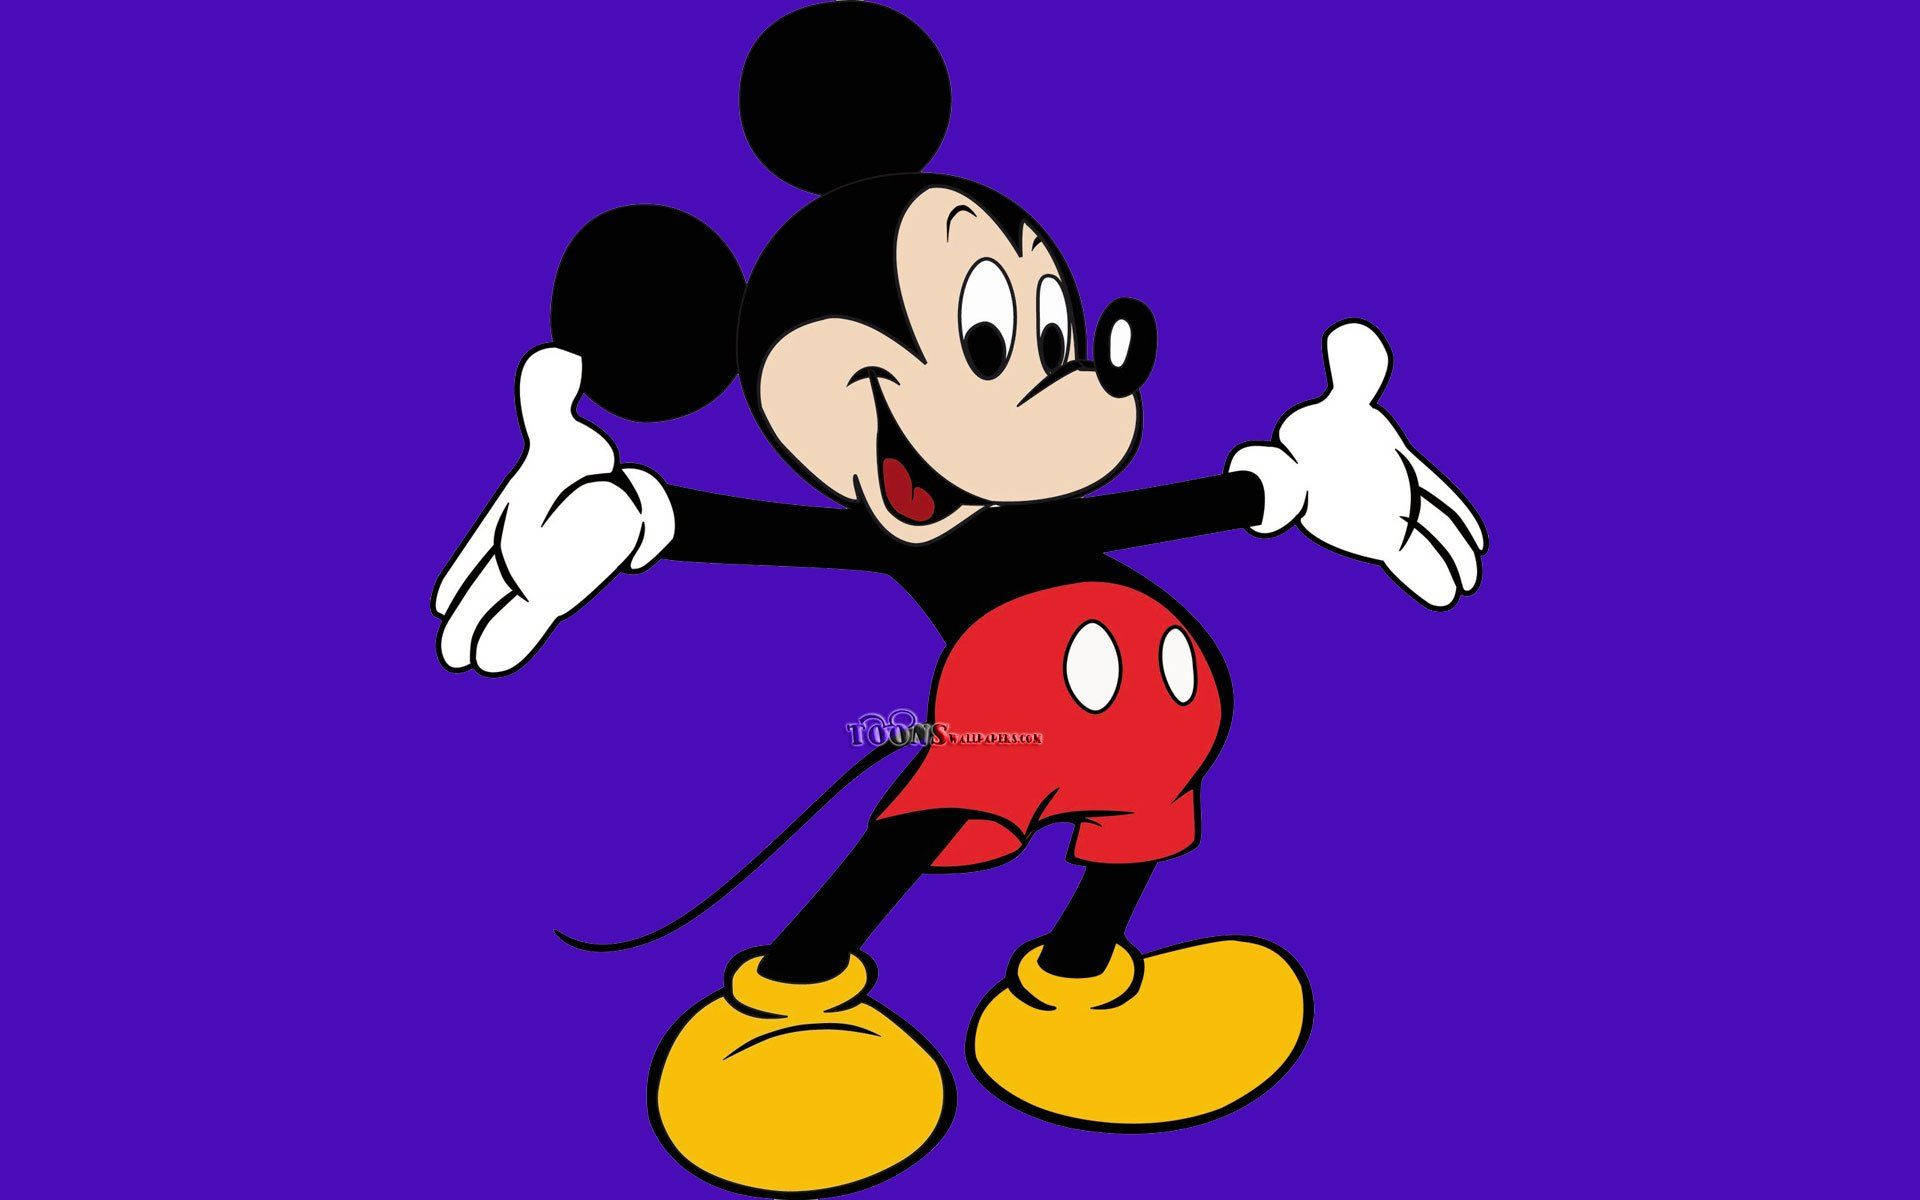 Mickey Mouse Is Ready To Paint The Town Blue-Violet. Wallpaper